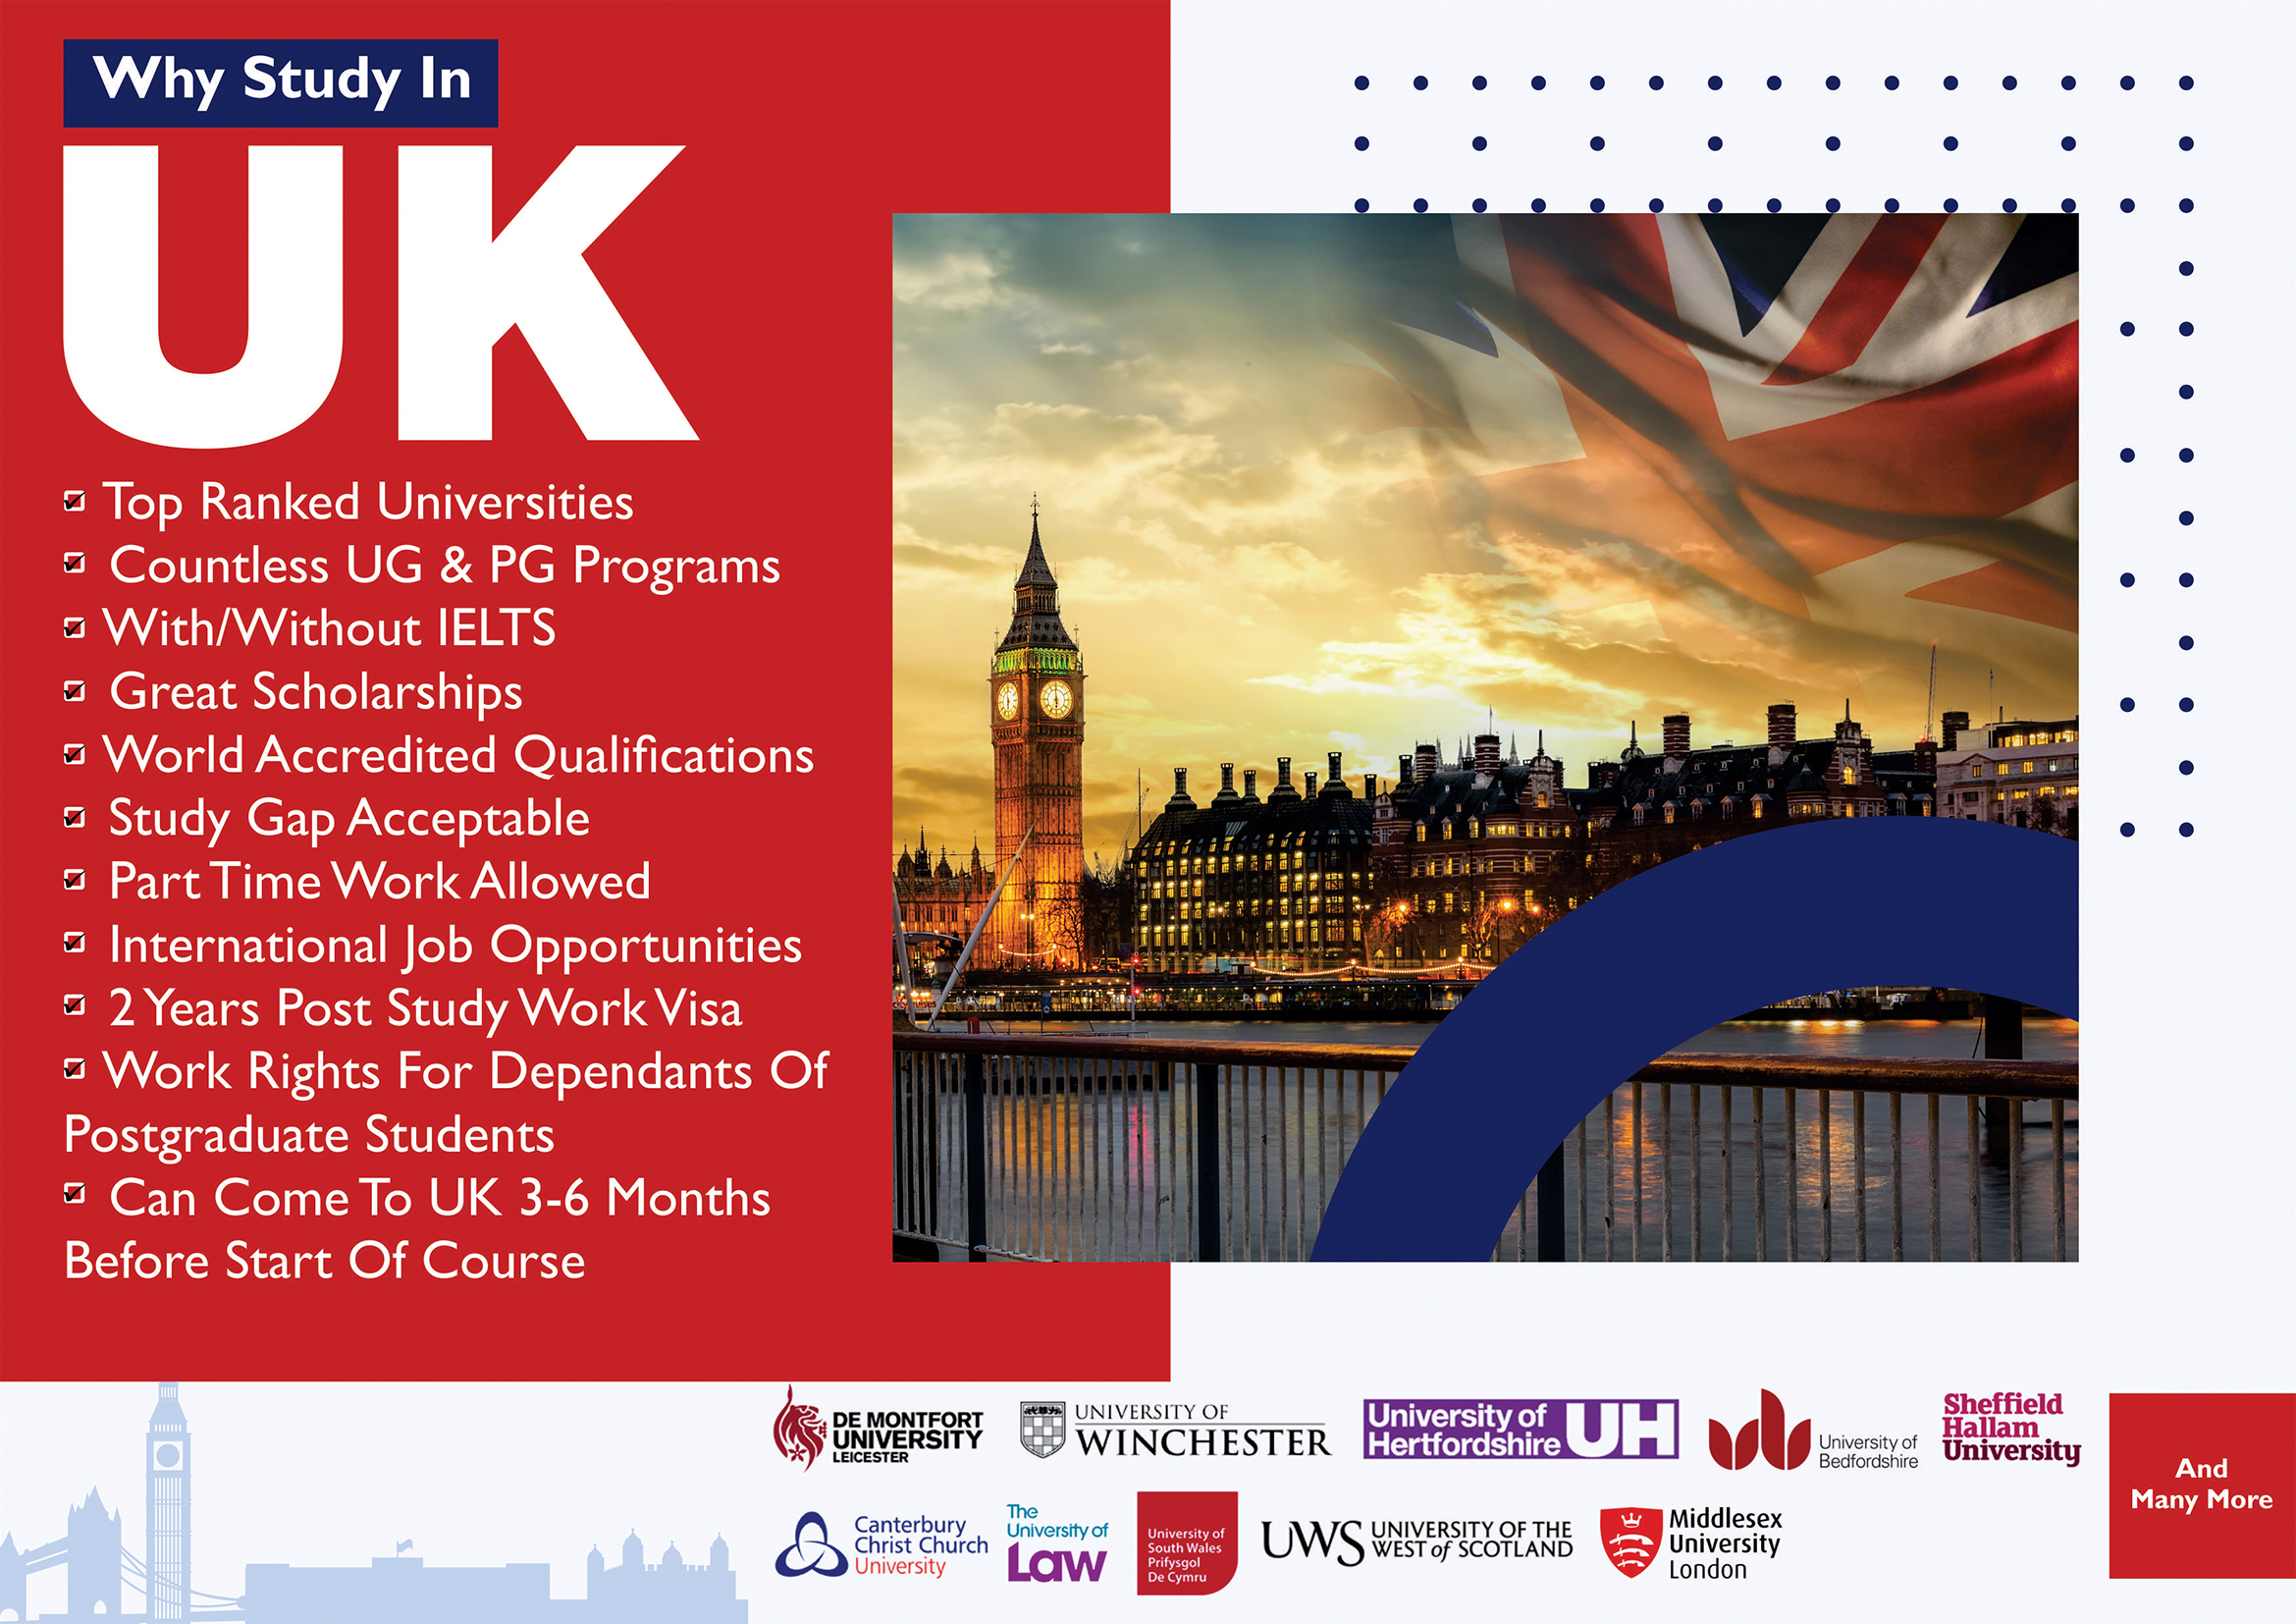 Study in UK | Work Placement and scholarships for students in London